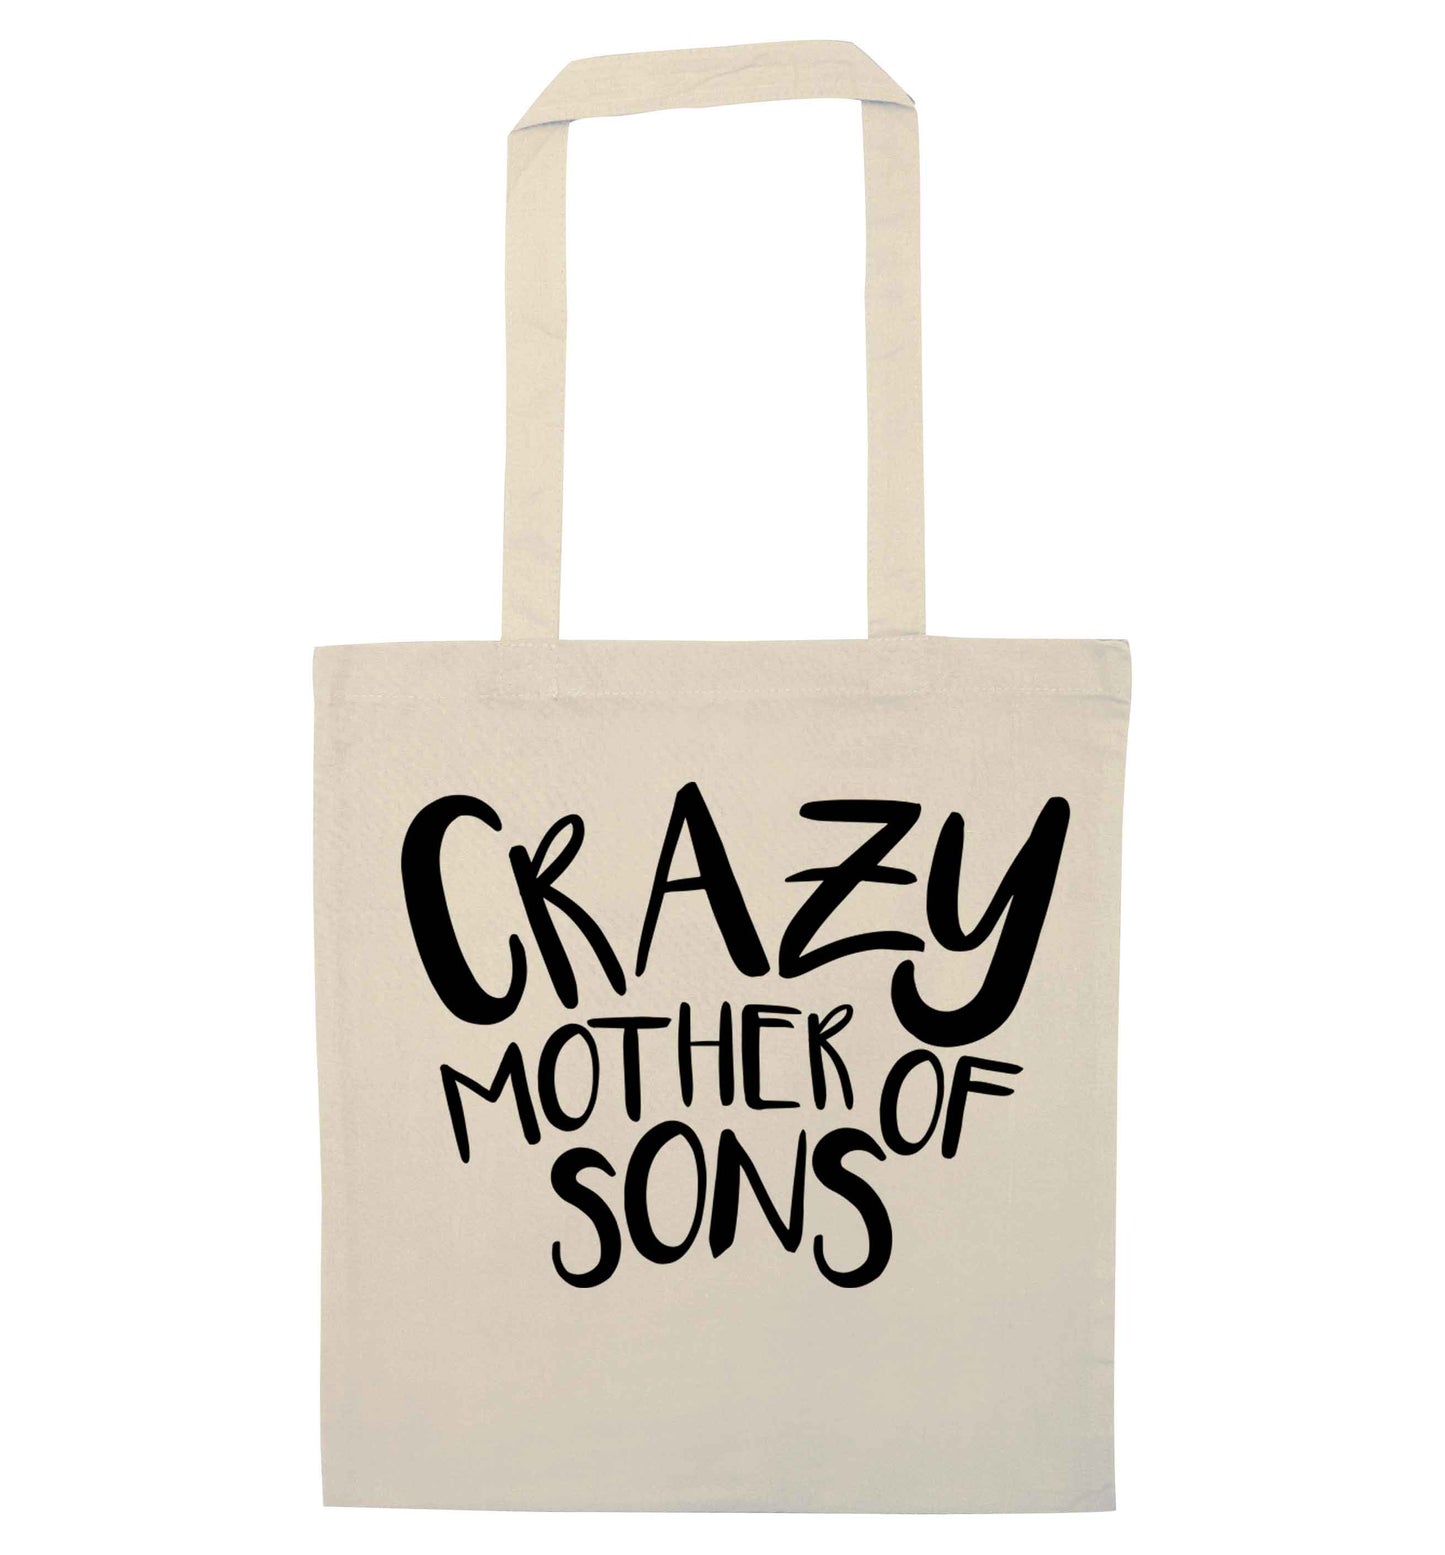 Crazy mother of sons natural tote bag